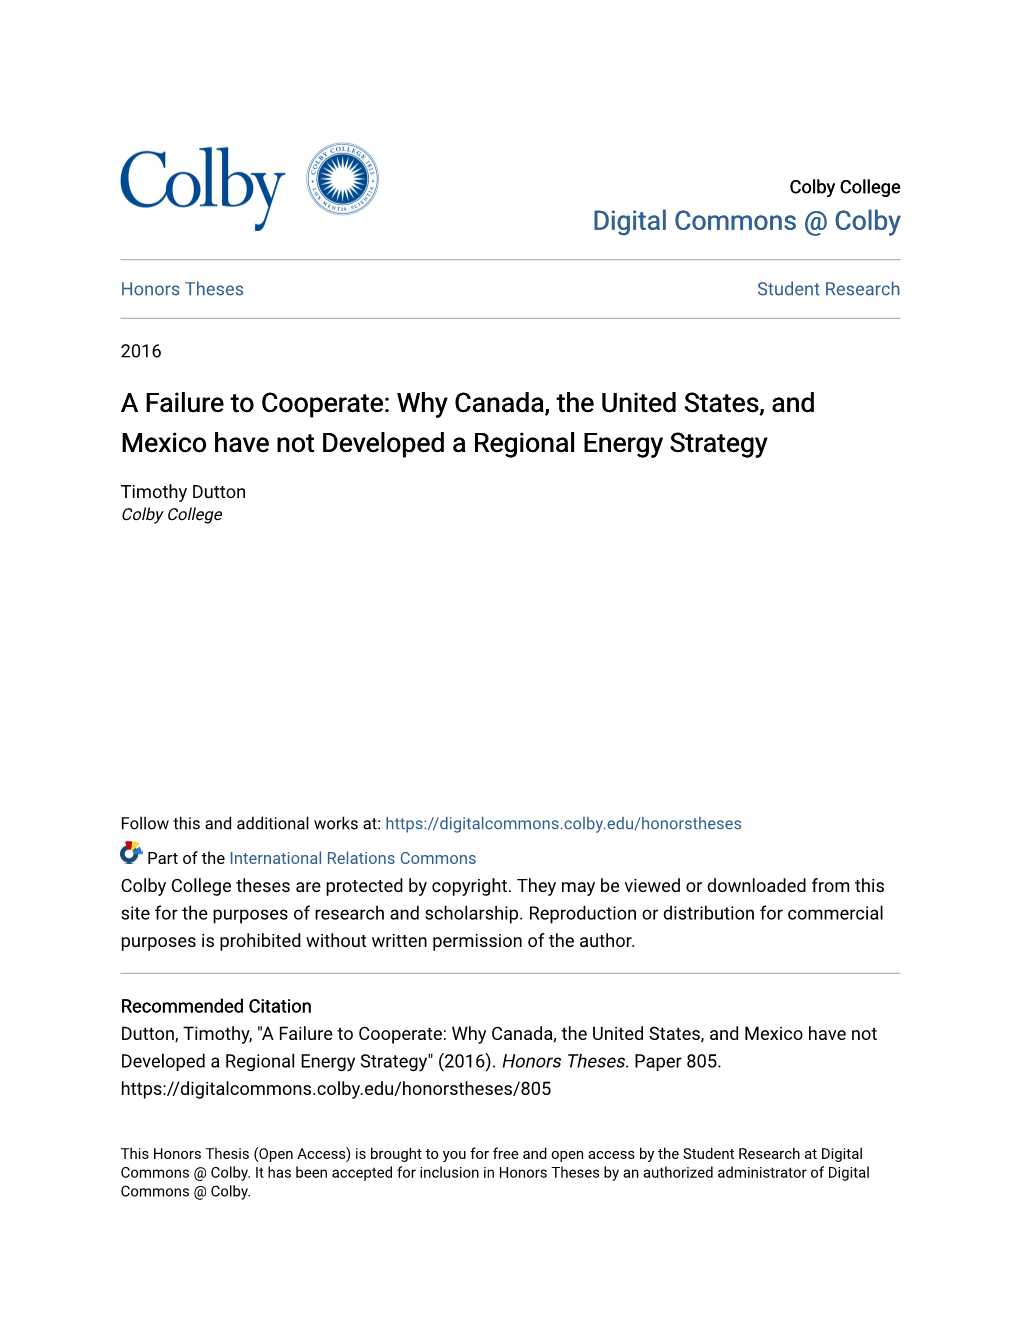 Why Canada, the United States, and Mexico Have Not Developed a Regional Energy Strategy